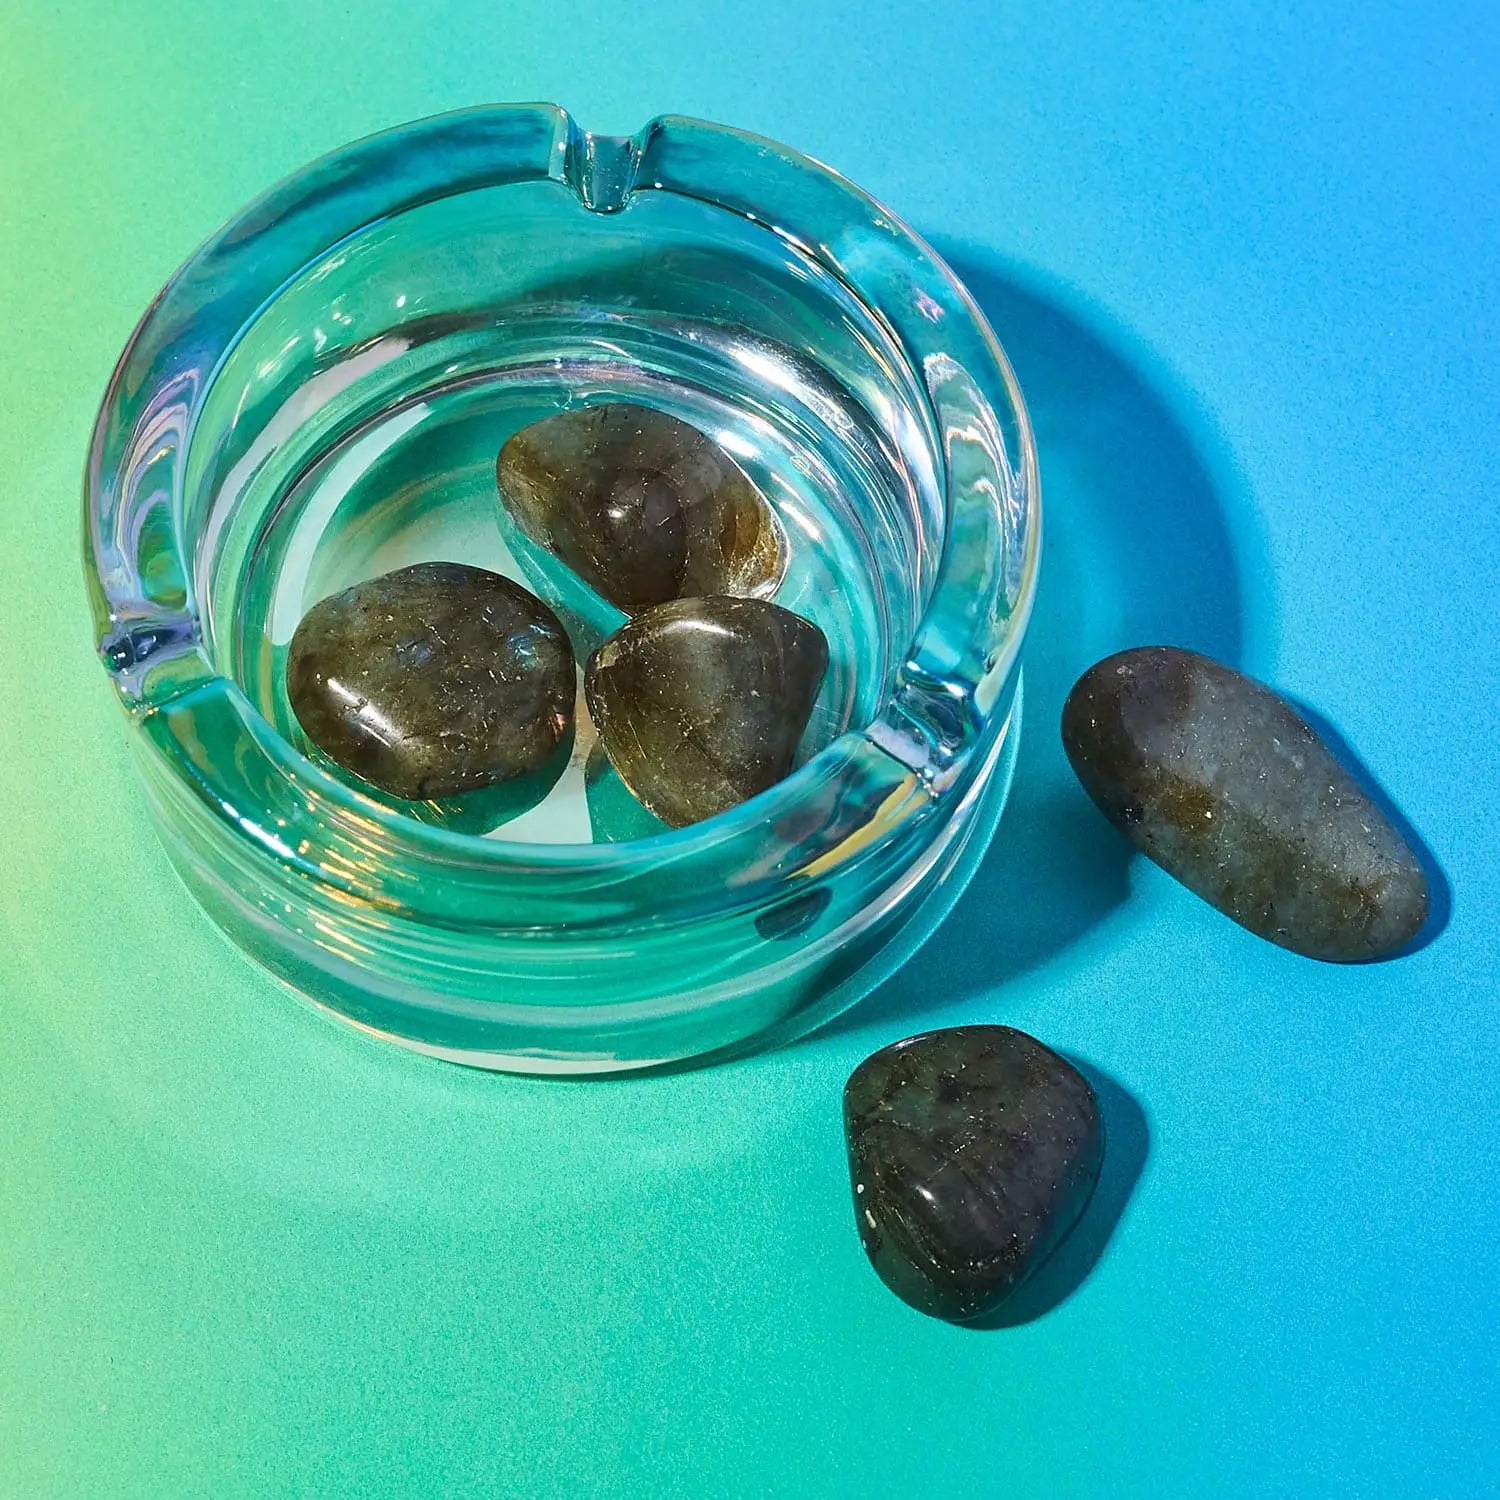 Witchy Ways: Labradorite Crystal Meaning + Uses